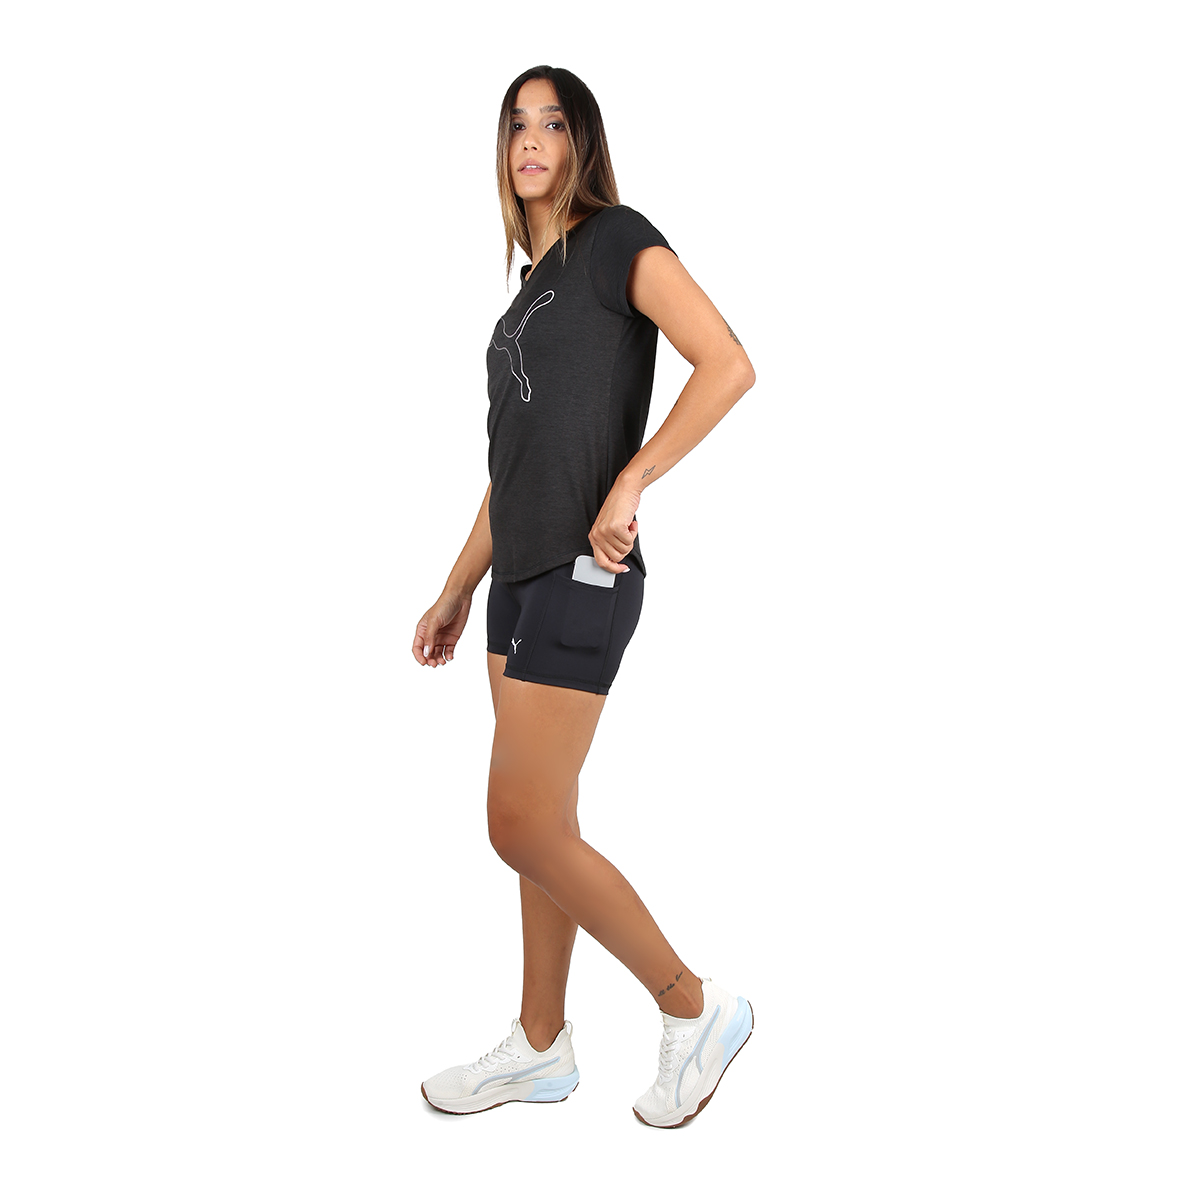 Short Running Puma Fit 5 Mujer,  image number null